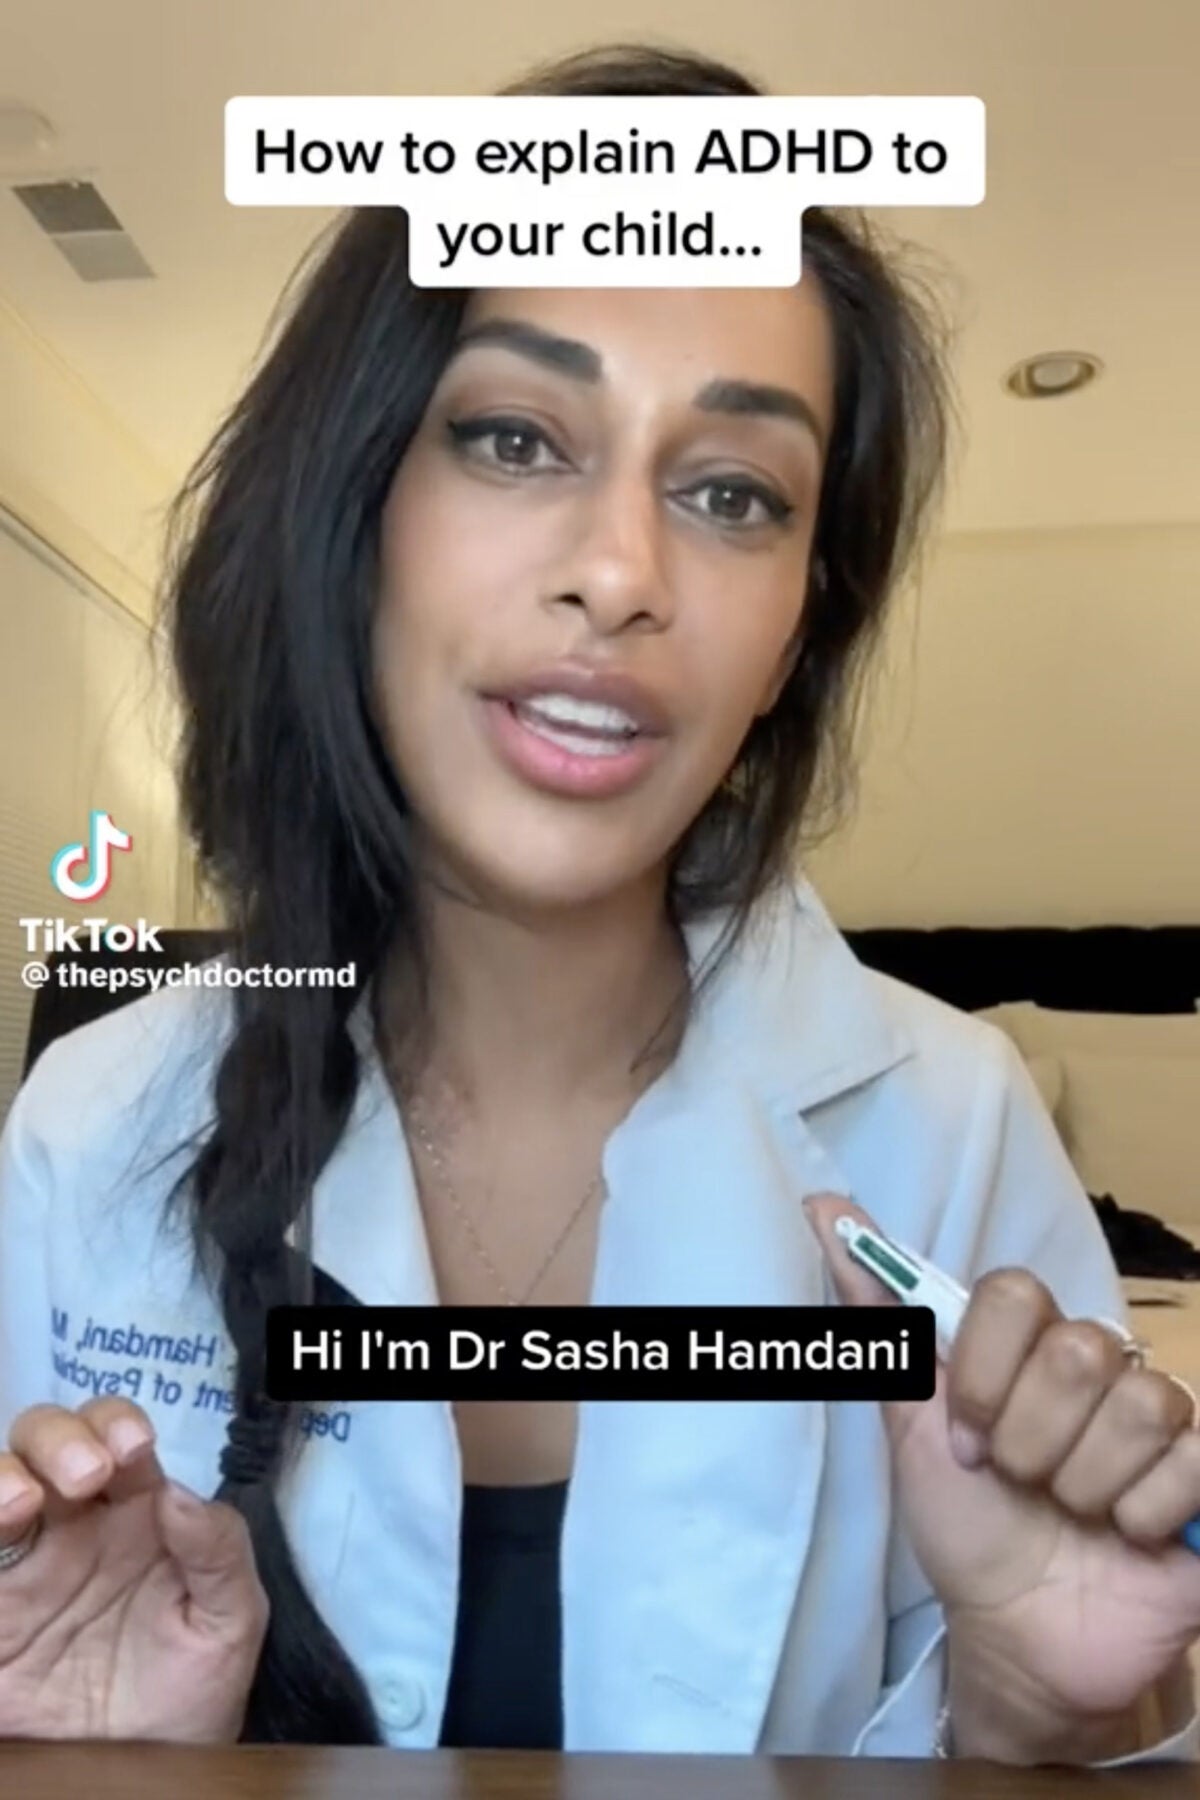 Still image capture from TikTok: A brown woman wearing a lab coat and hair in a single braid holds a four-colored pen and talks to the camera. The captions say “How to explain ADHD to your child…” and “Hi I’m Dr. Sasha Hamdani.”